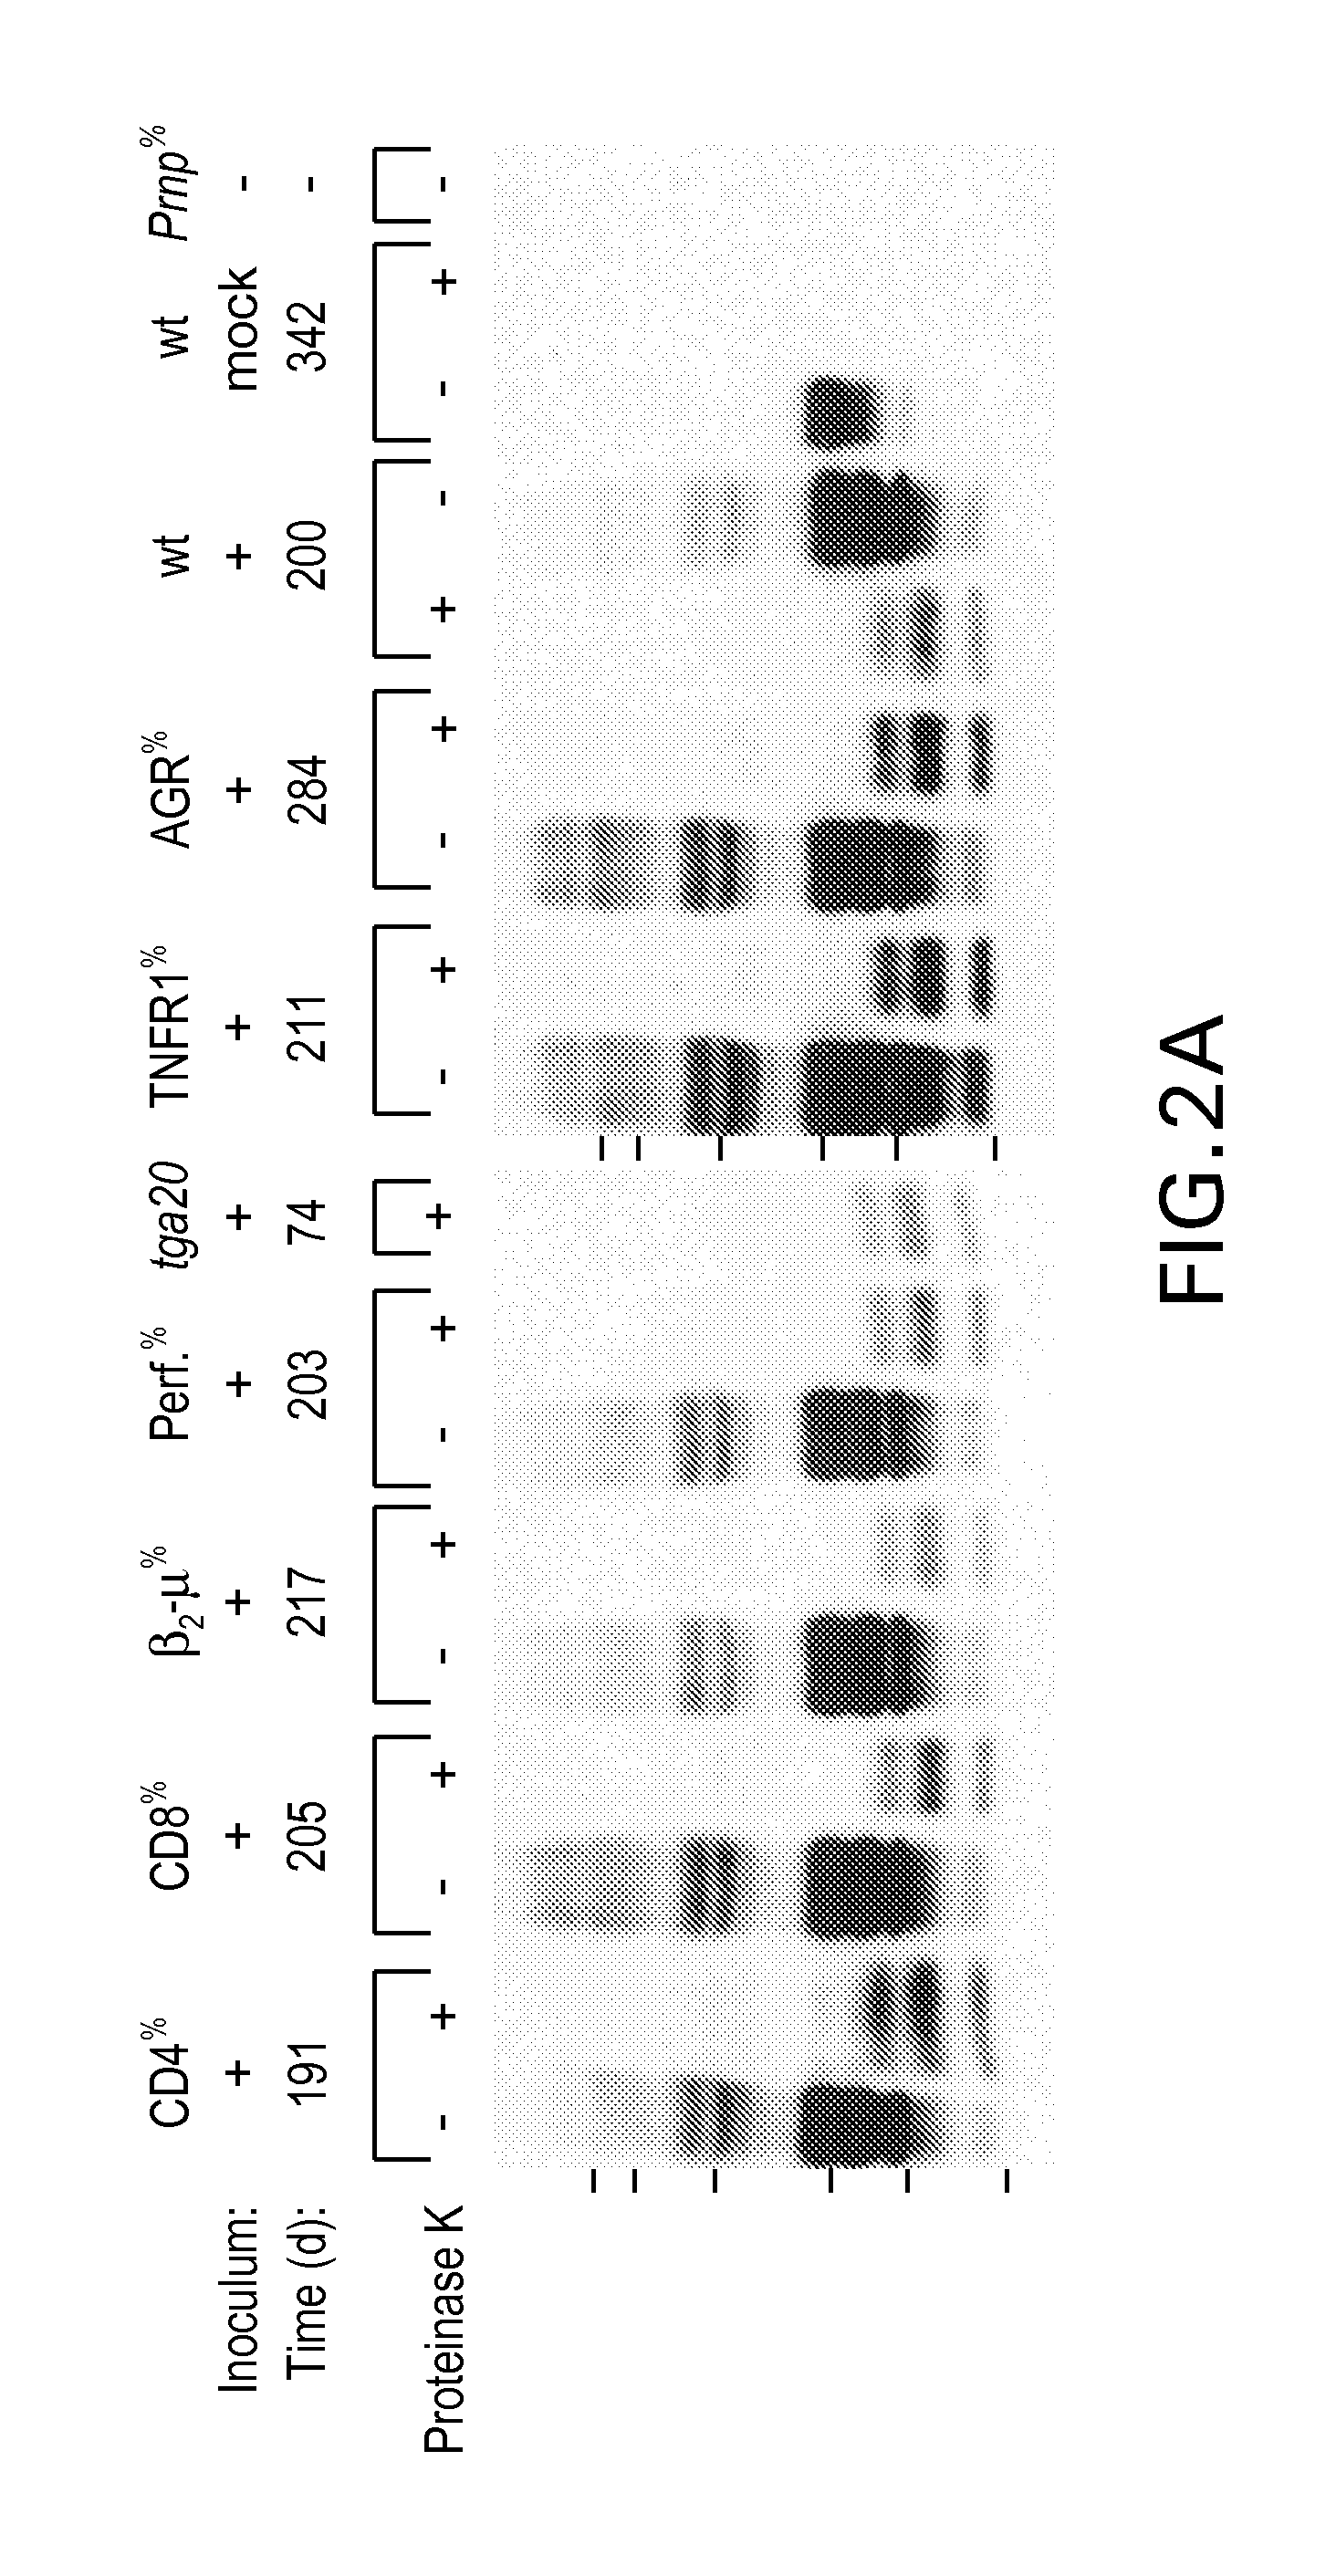 Diagnostics And Therapeutics For Transmissible Spongiform Encephalopathy And Methods For The Manufacture Of Non-Infective Blood Products And Tissued Derived Products